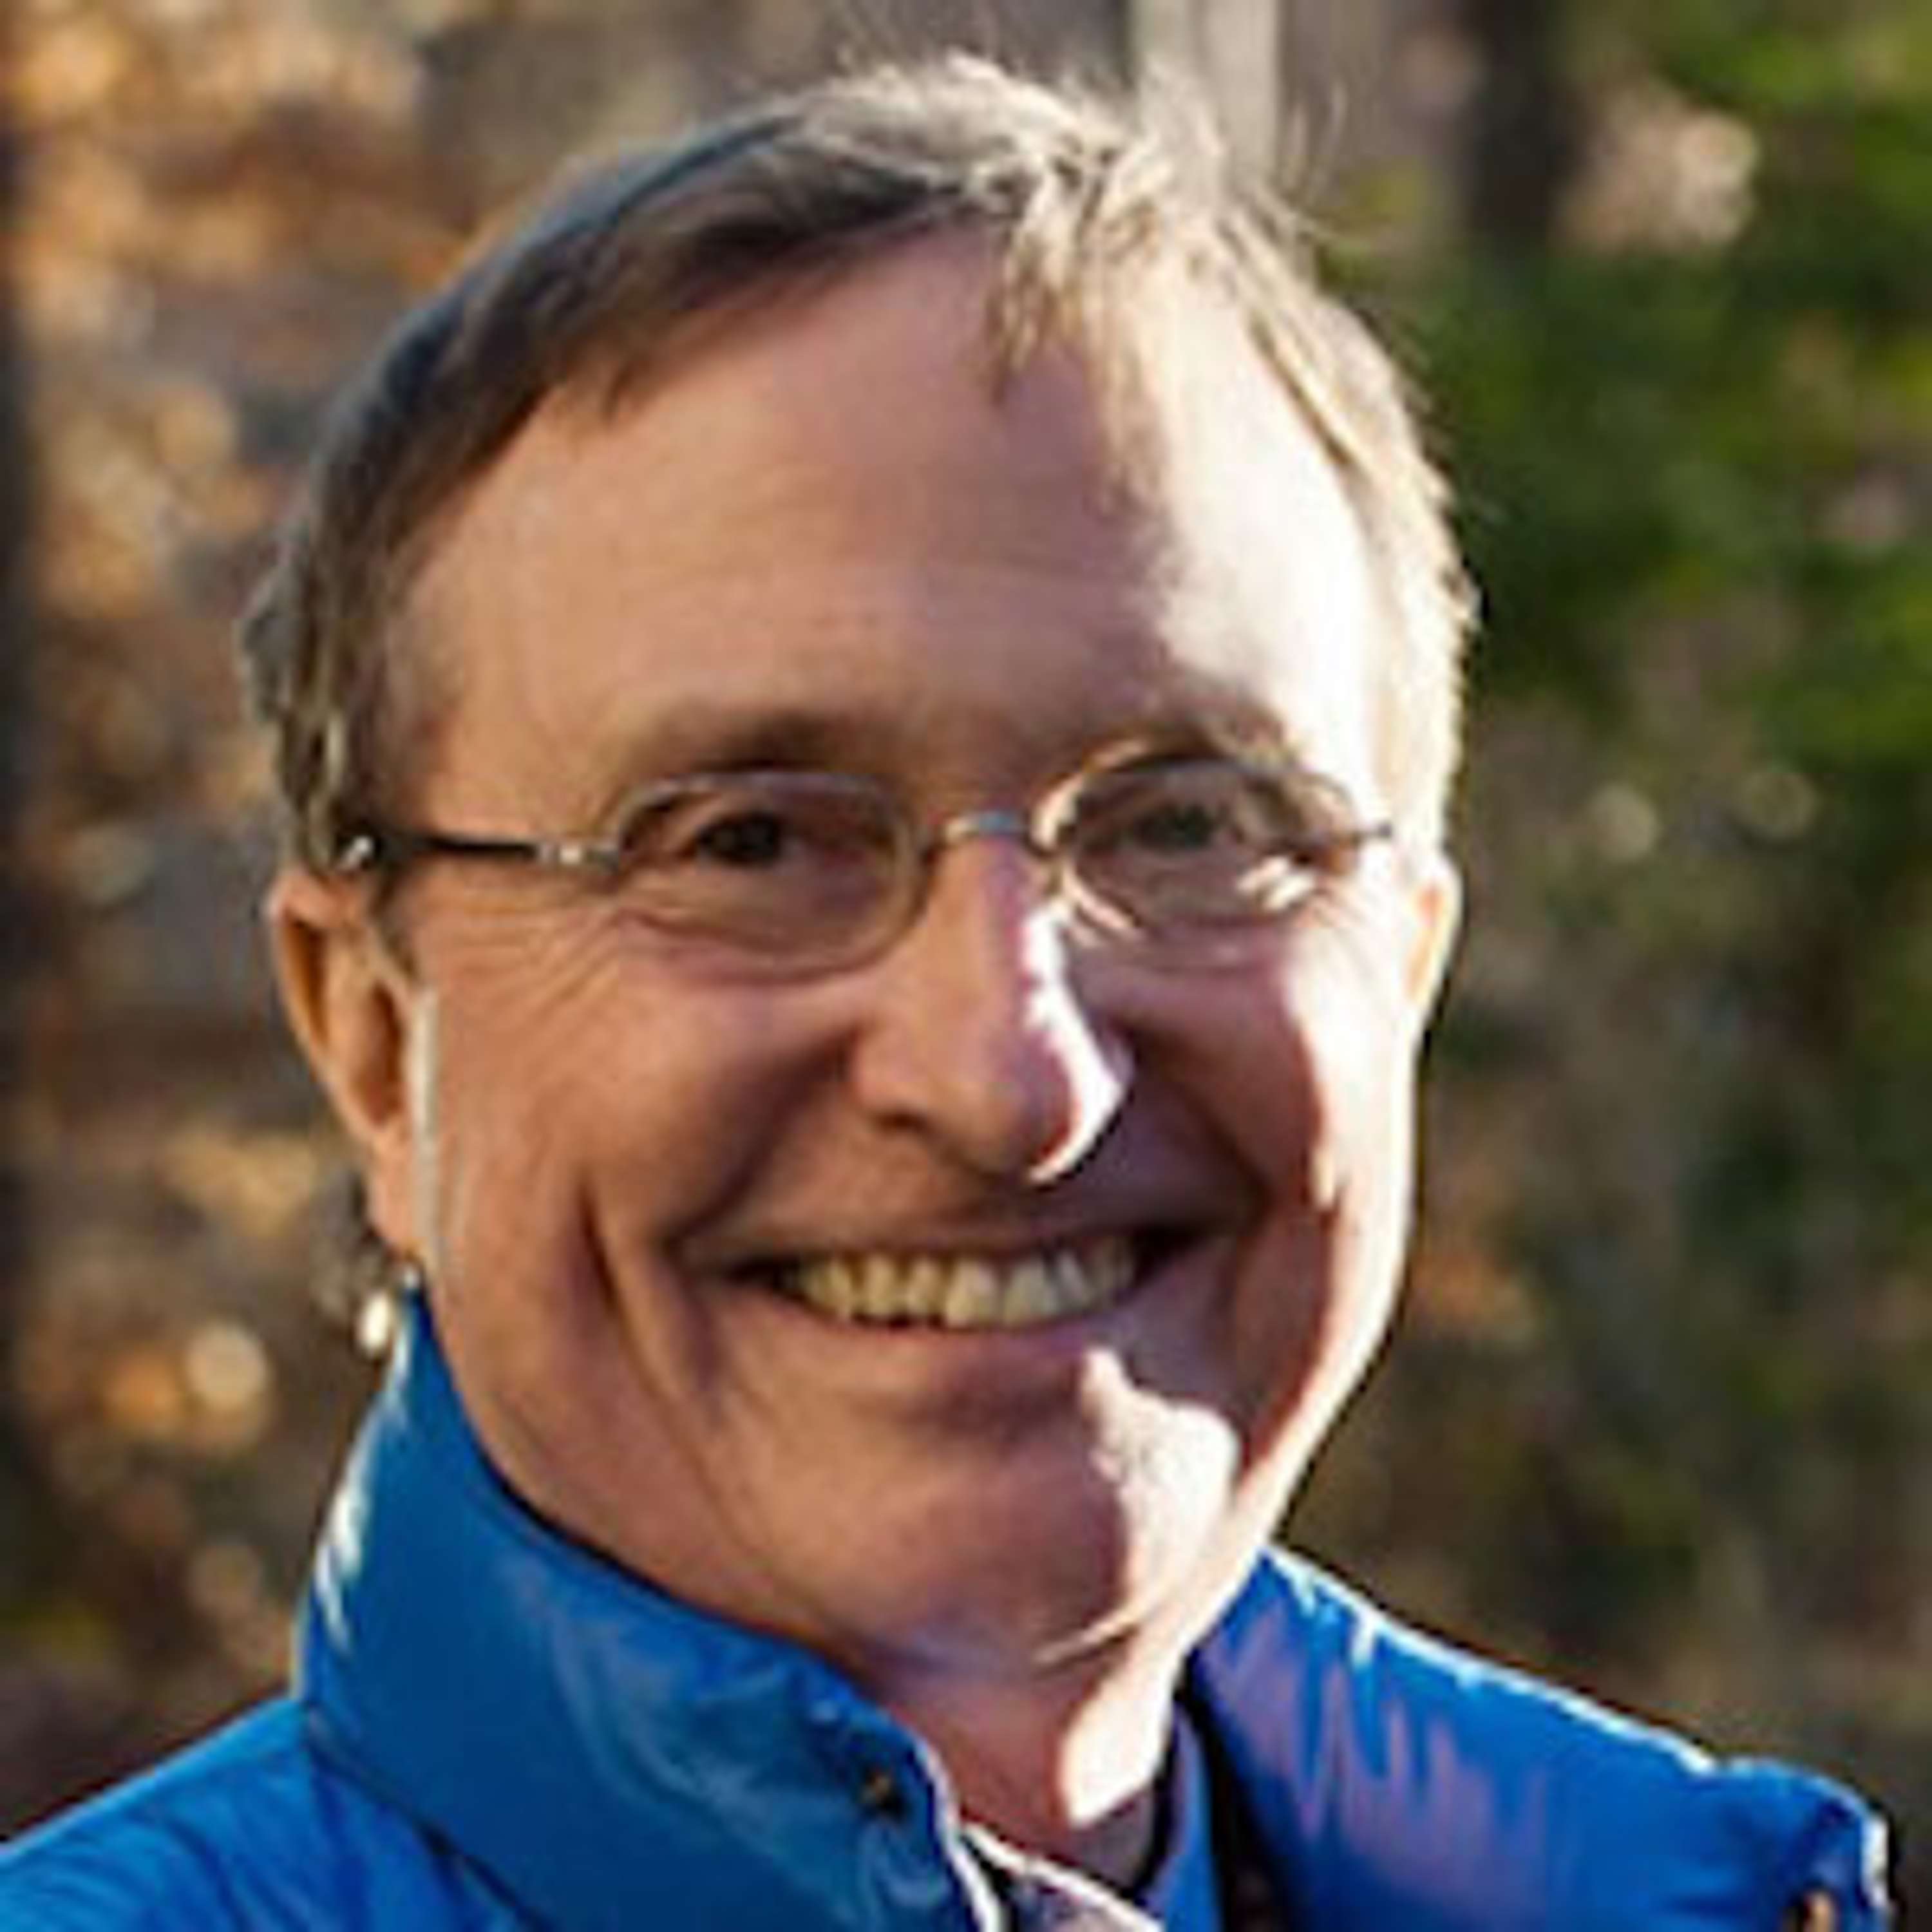 Episode 73: Interview with Thomas Lovejoy, “The Godfather of Biodiversity”